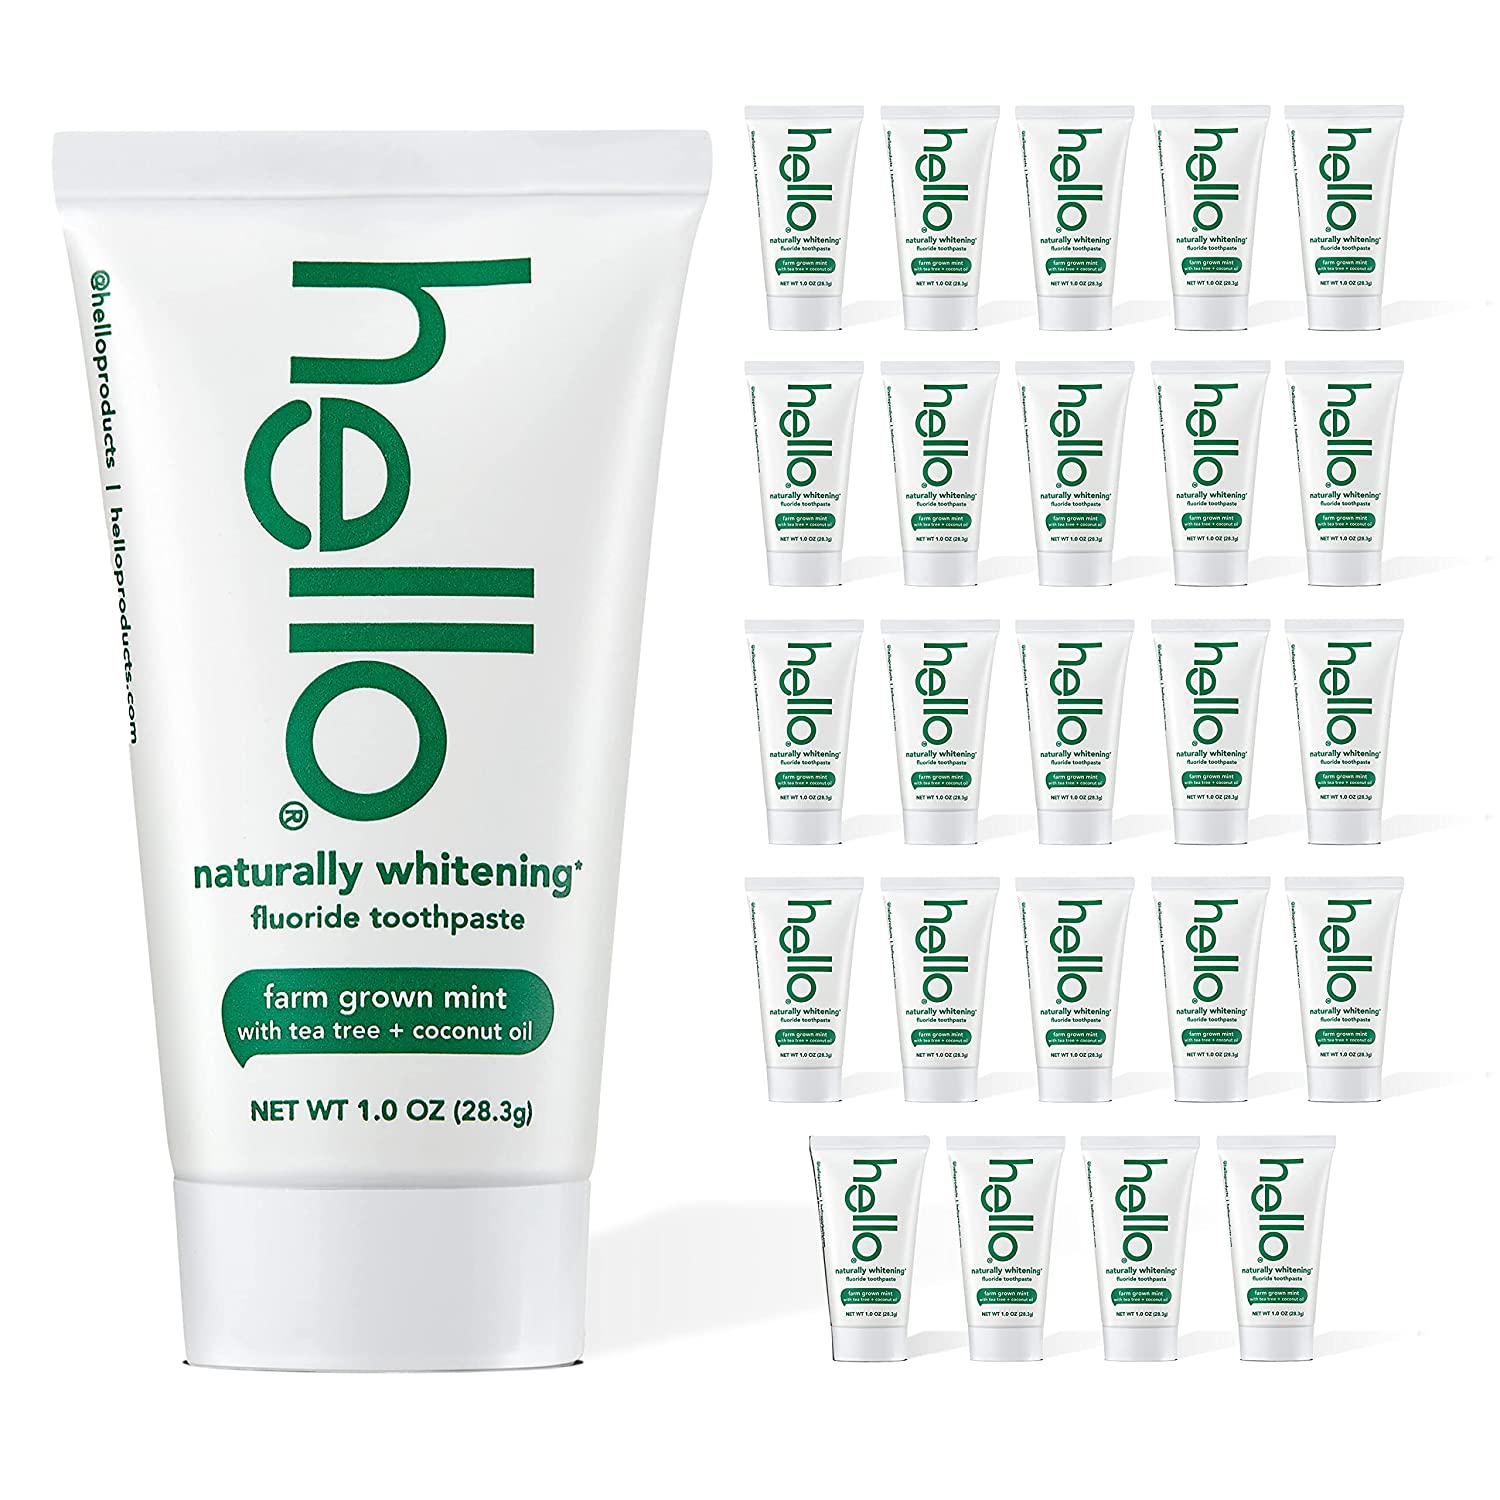 Hello Naturally Whitening Fluoride Toothpaste, 1 Ounce (Pack of 24), Farm Grown Mint with Tea Tree and Coconut Oil, Vegan, SLS Free, Gluten Free and Peroxide Free